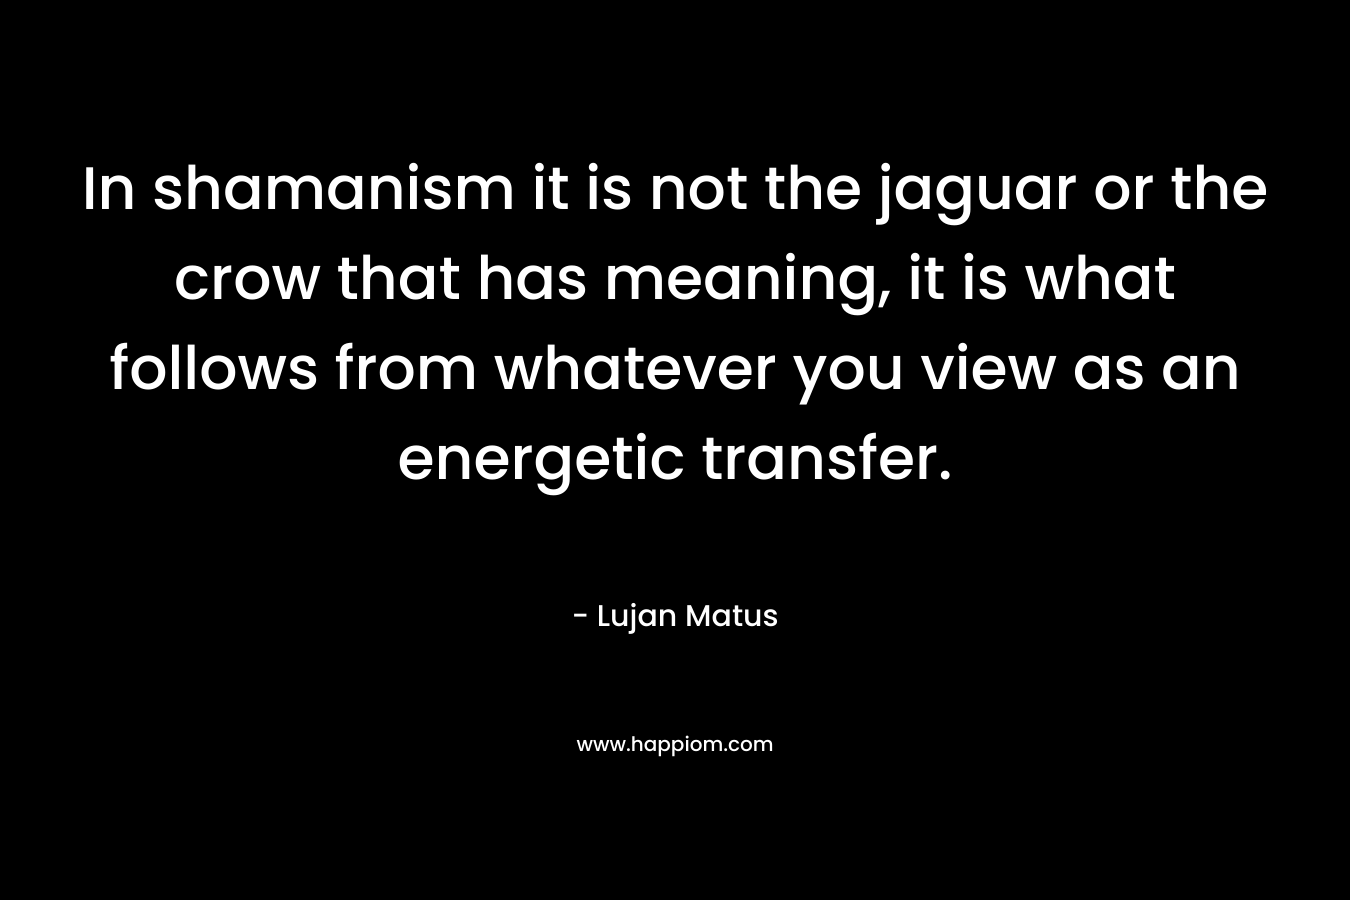 In shamanism it is not the jaguar or the crow that has meaning, it is what follows from whatever you view as an energetic transfer. – Lujan Matus